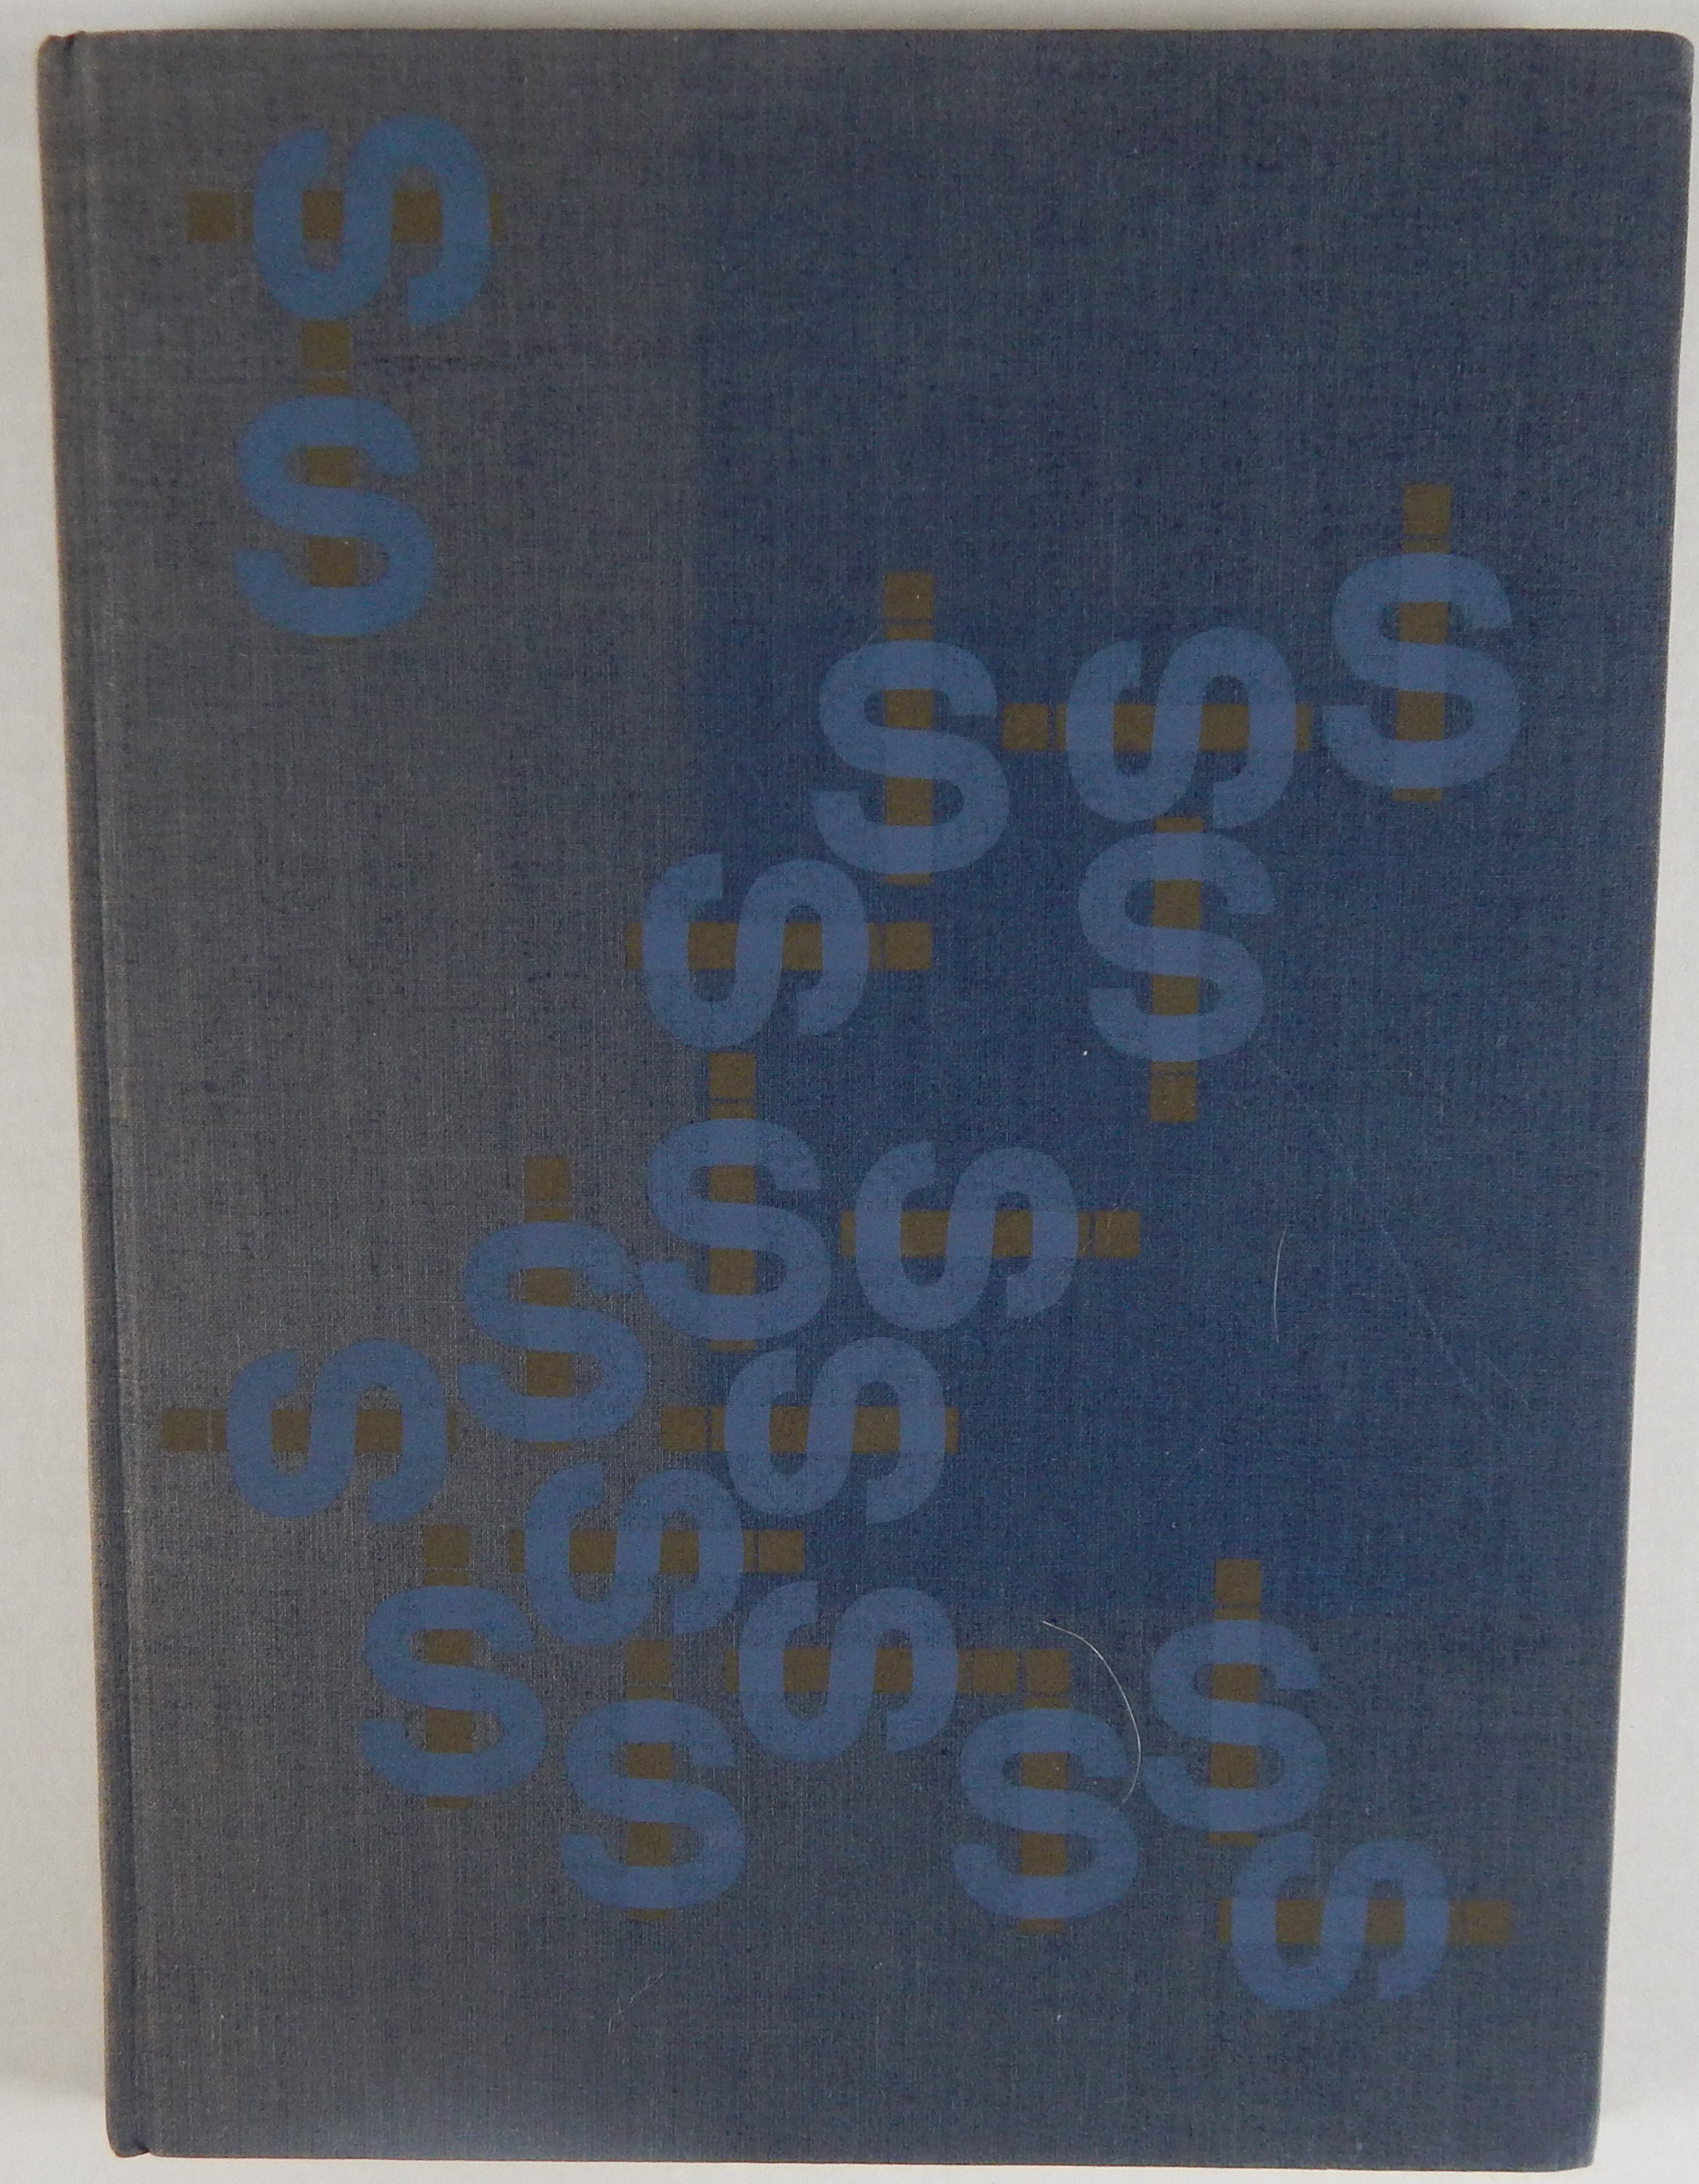 Tickets, Publications & Pins - 1954 Hardbound 1st Edition of Sports Illustrated